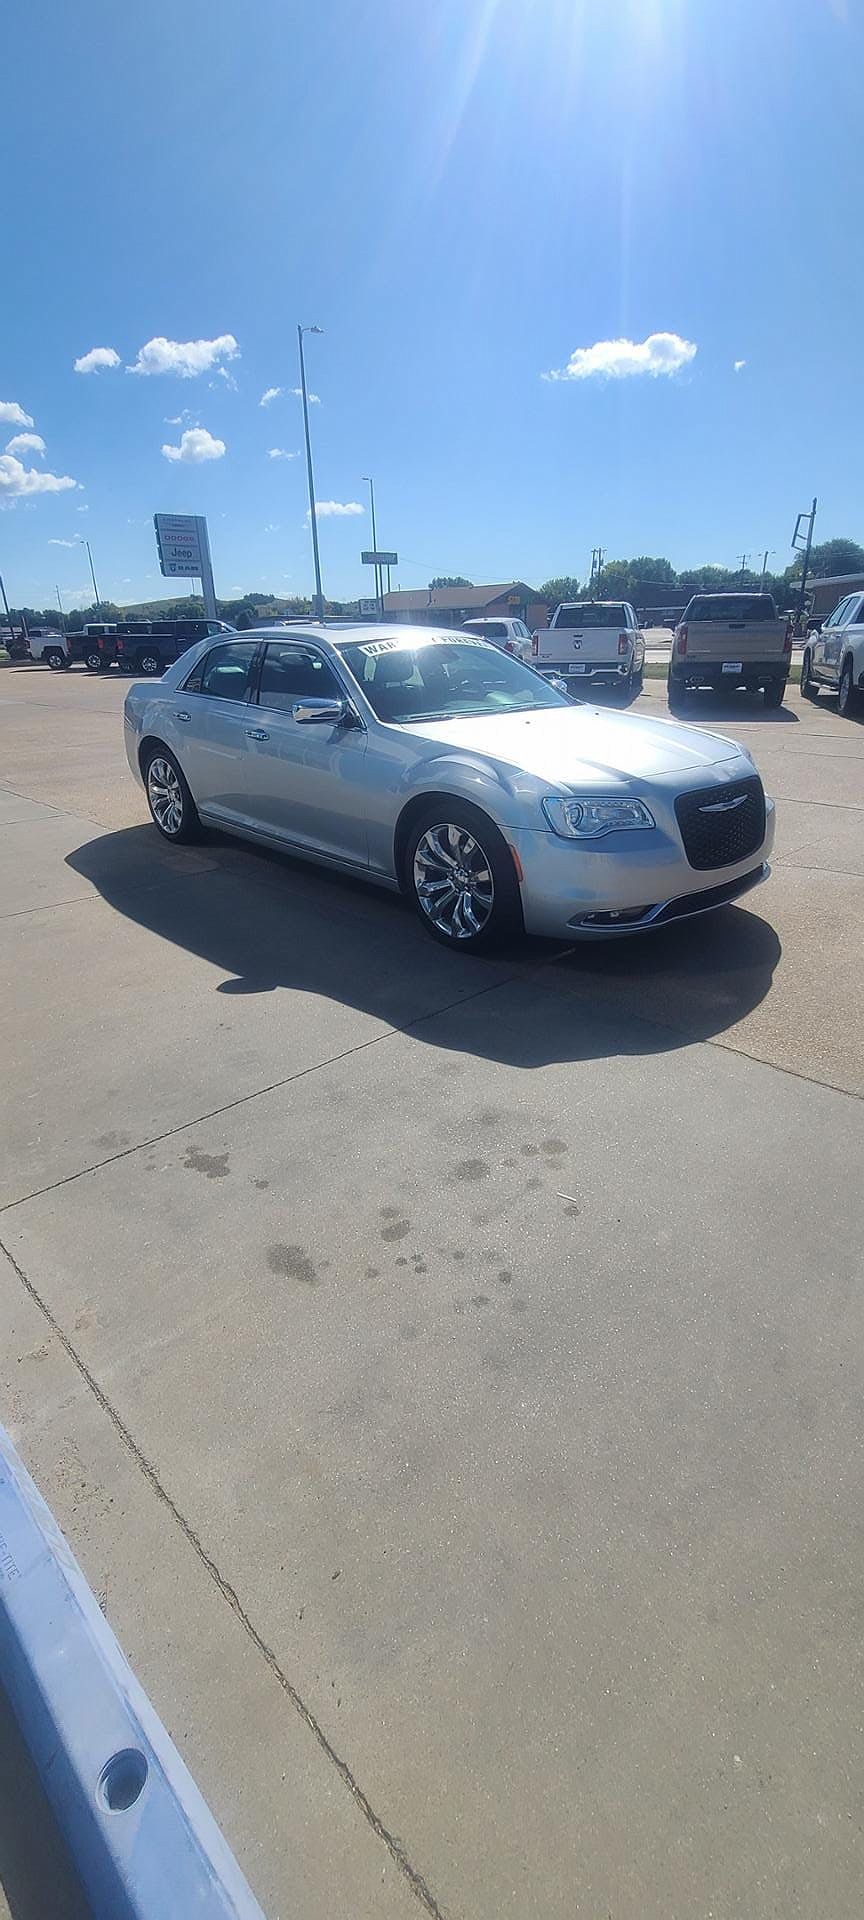 2020 Chrysler 300 Limited Edition image 3